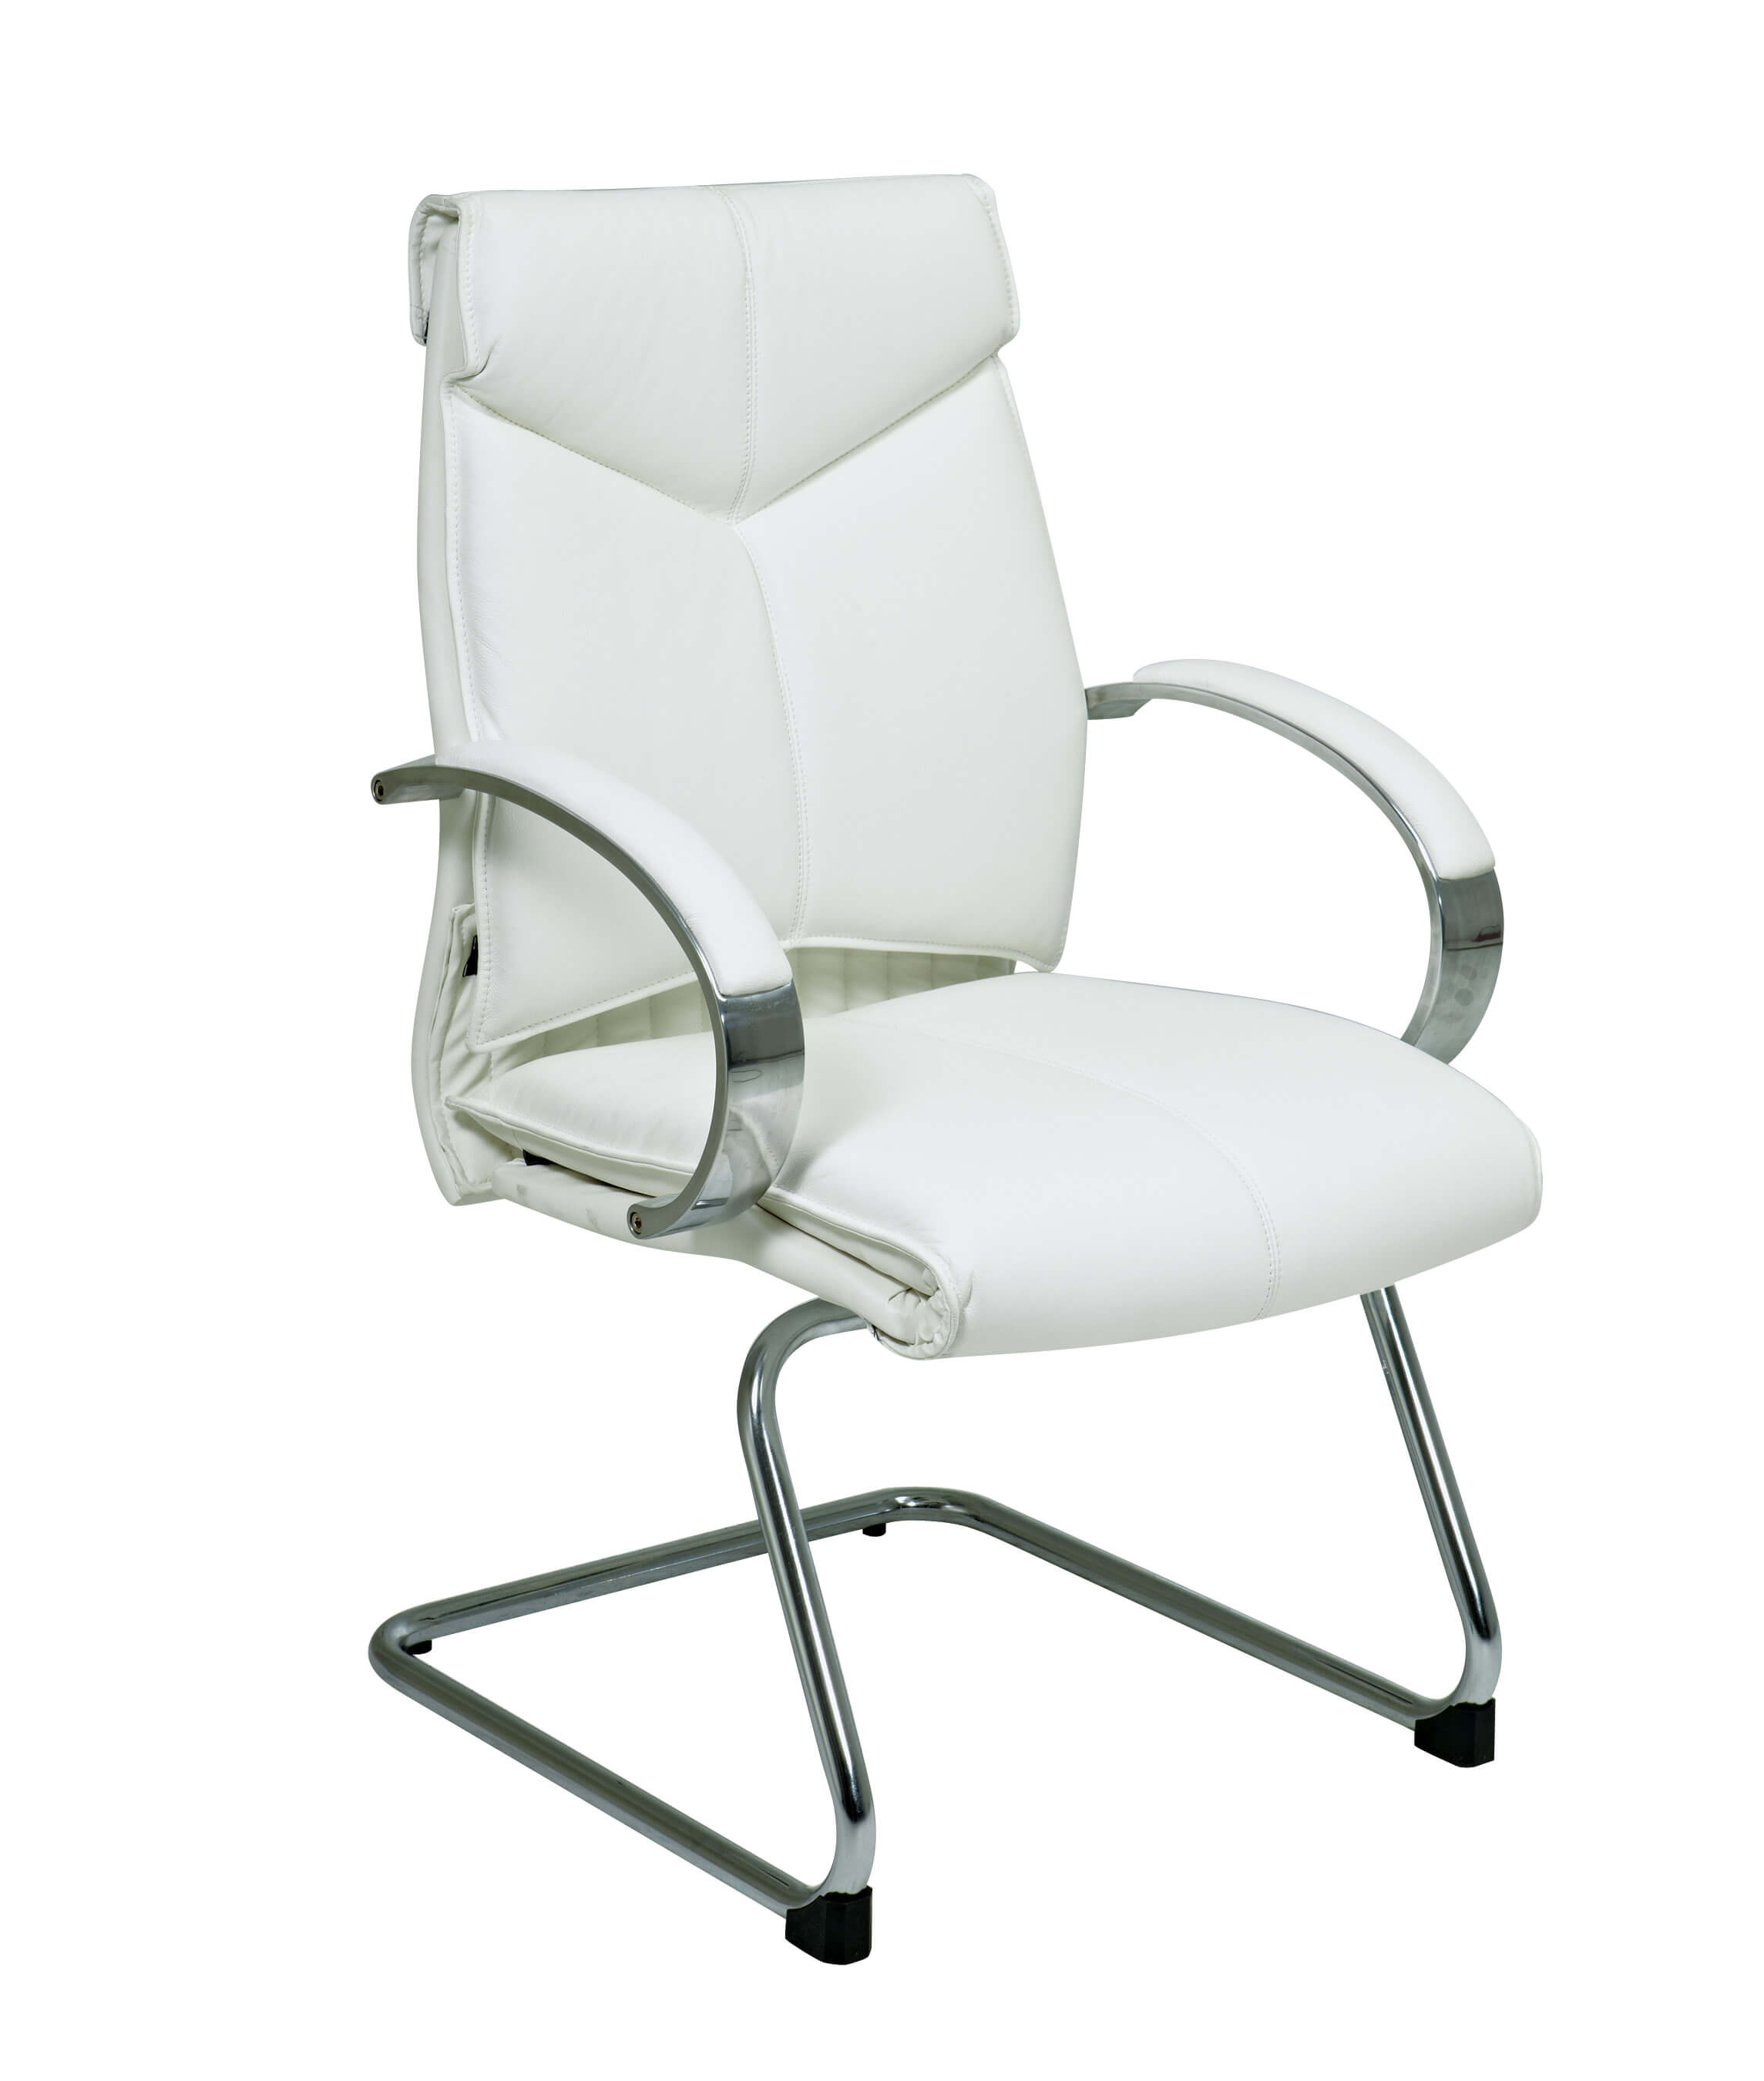 Side chairs with arms CUB 7275 PSO